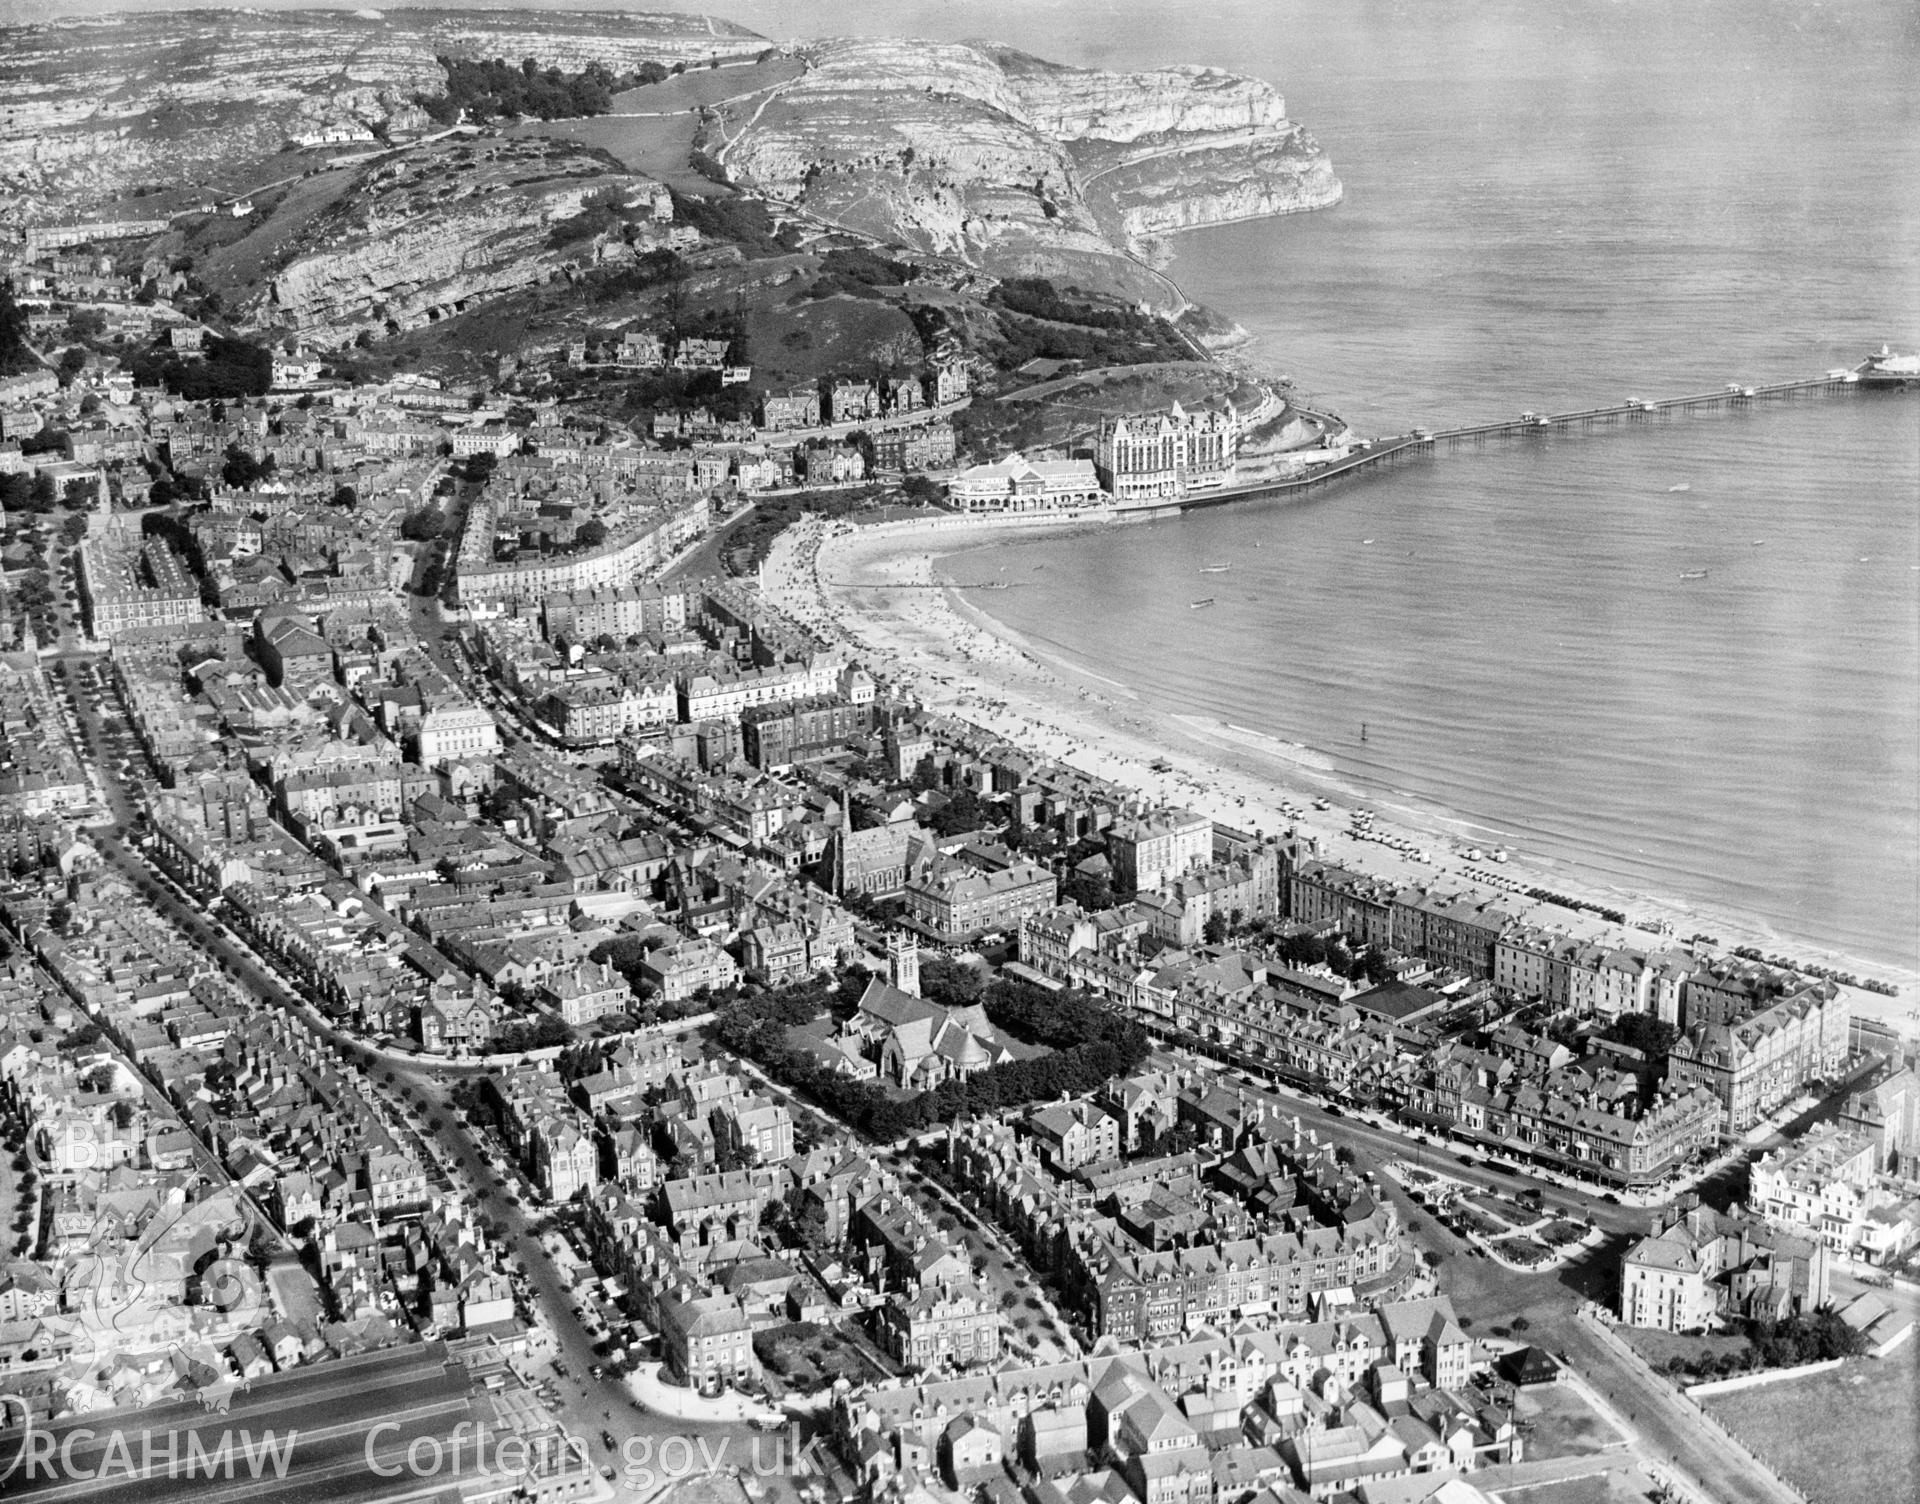 General view of Llandudno, oblique aerial view. 5?x4? black and white glass plate negative.